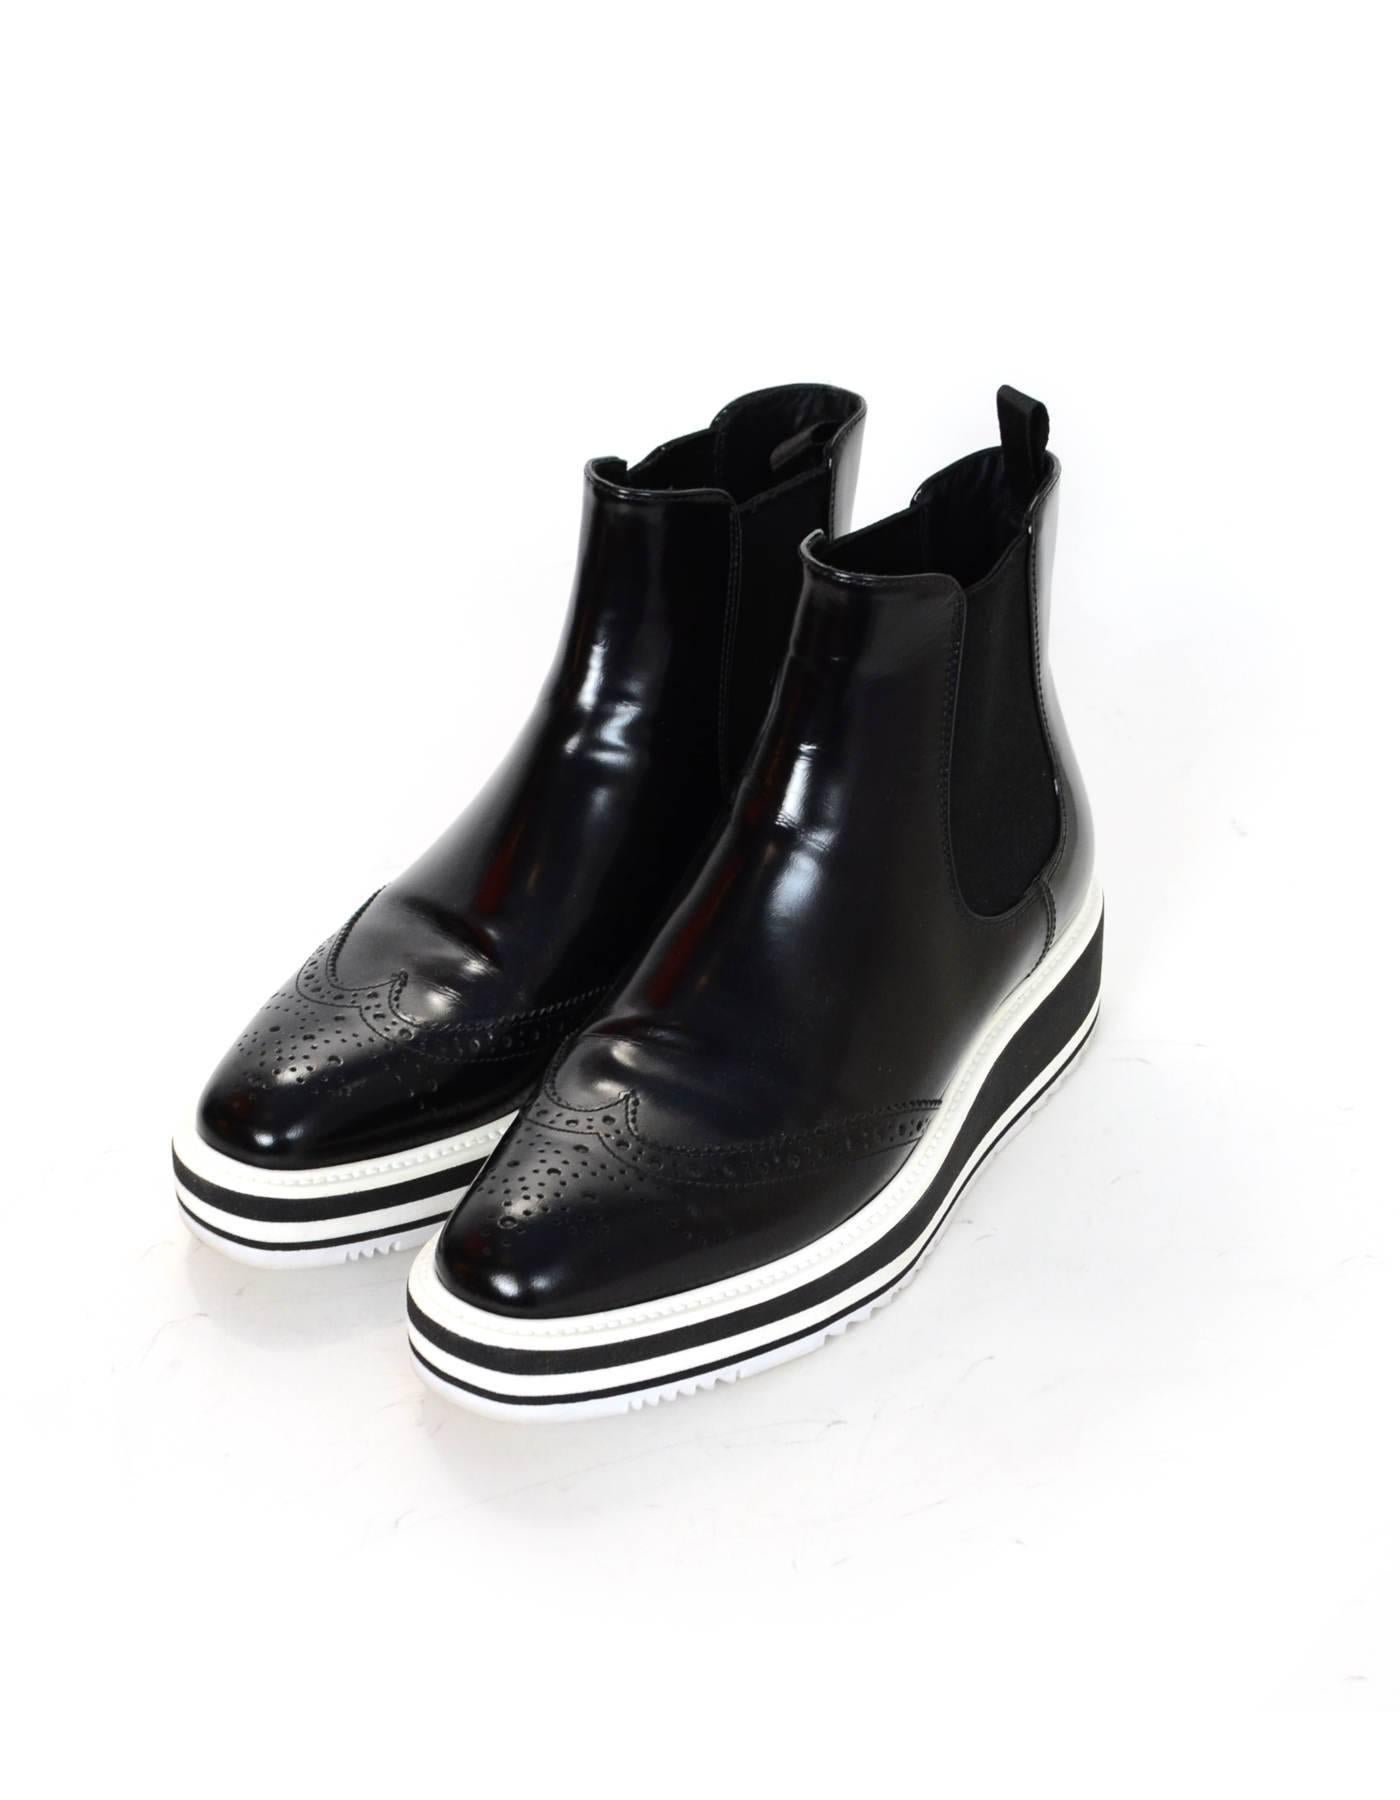 Prada Black Leather Micro-Sole Wing-Tip Chelsea Ankle Boots Sz 37

Made In: Italy
Color: Black
Materials: Leather
Closure/Opening: Slip on with stretch sides
Sole Stamp: Prada 37
Retail Price: $990 + tax
Overall Condition: Excellent pre-owned